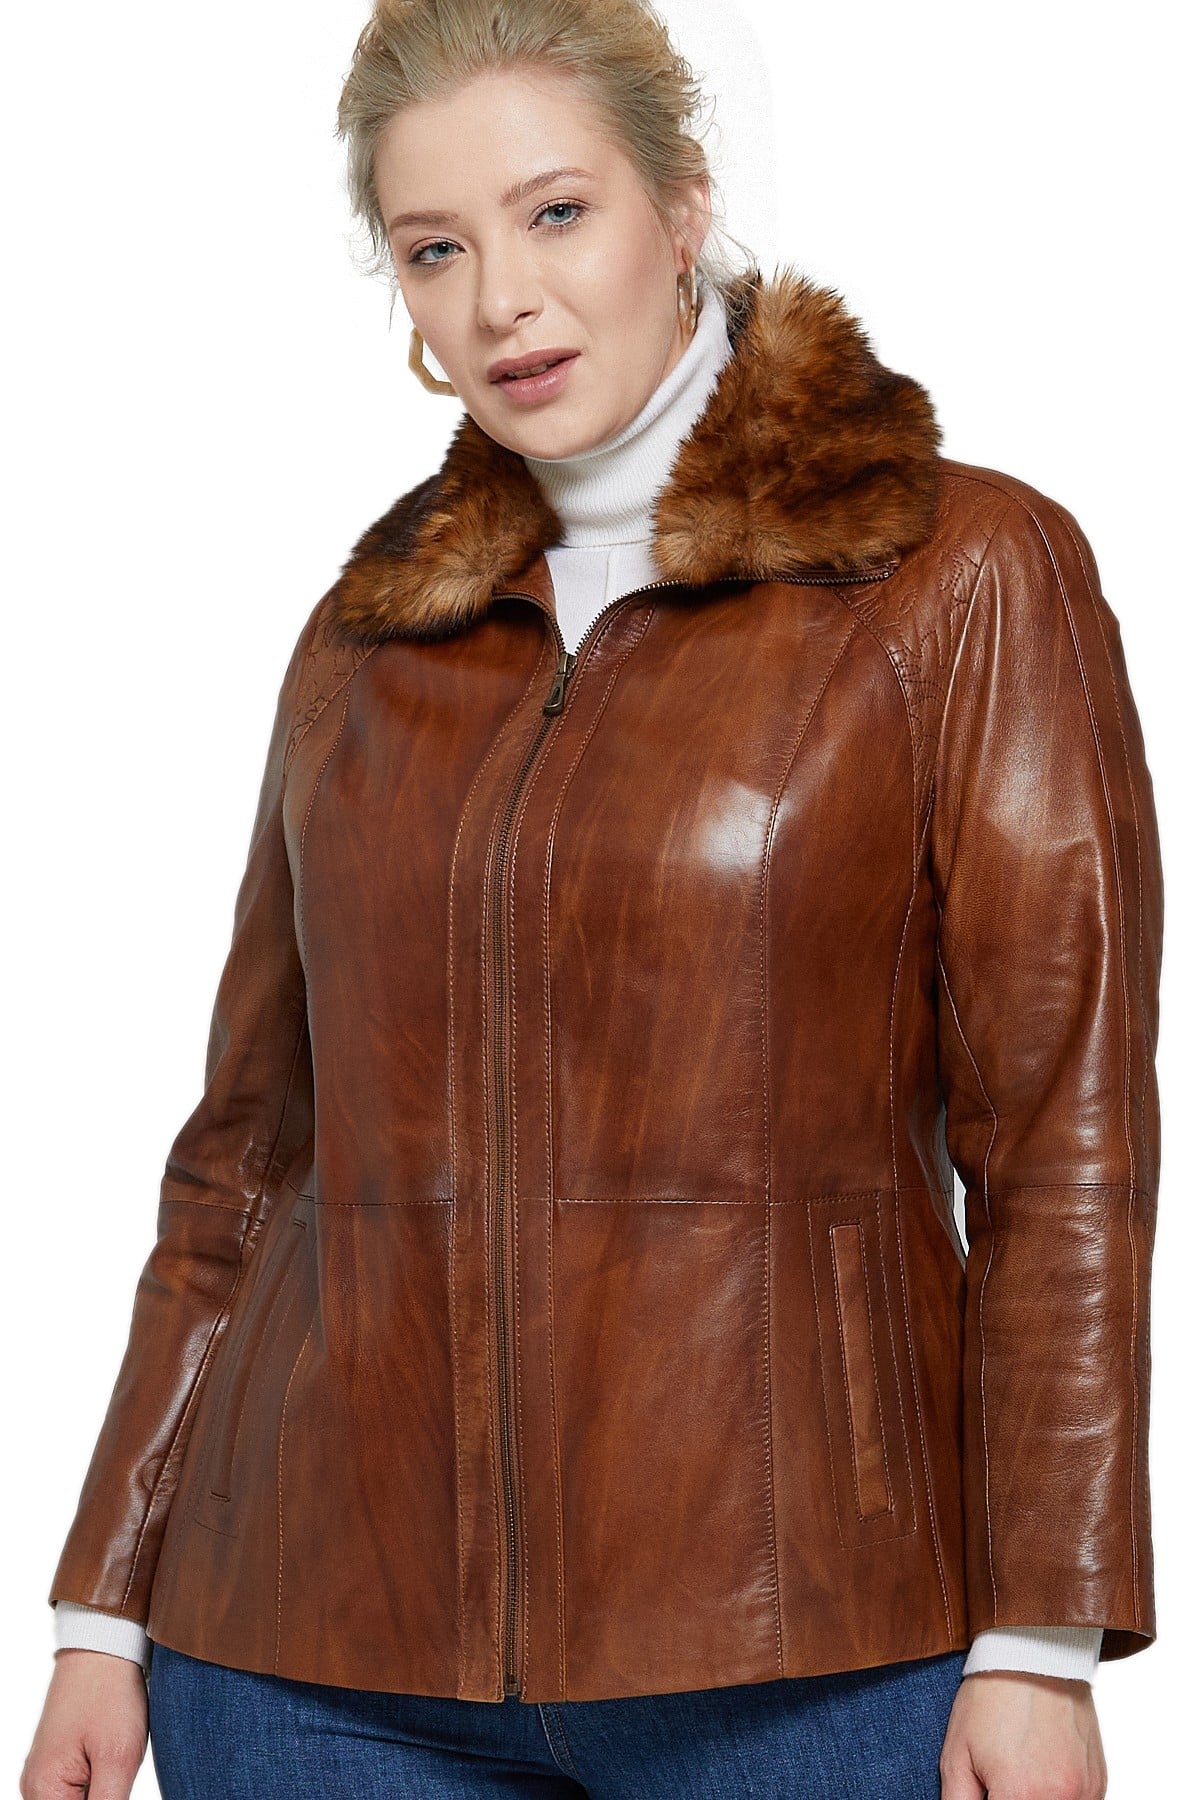 Fur Collar Brown Bomber Jacket of Leather in Chicago